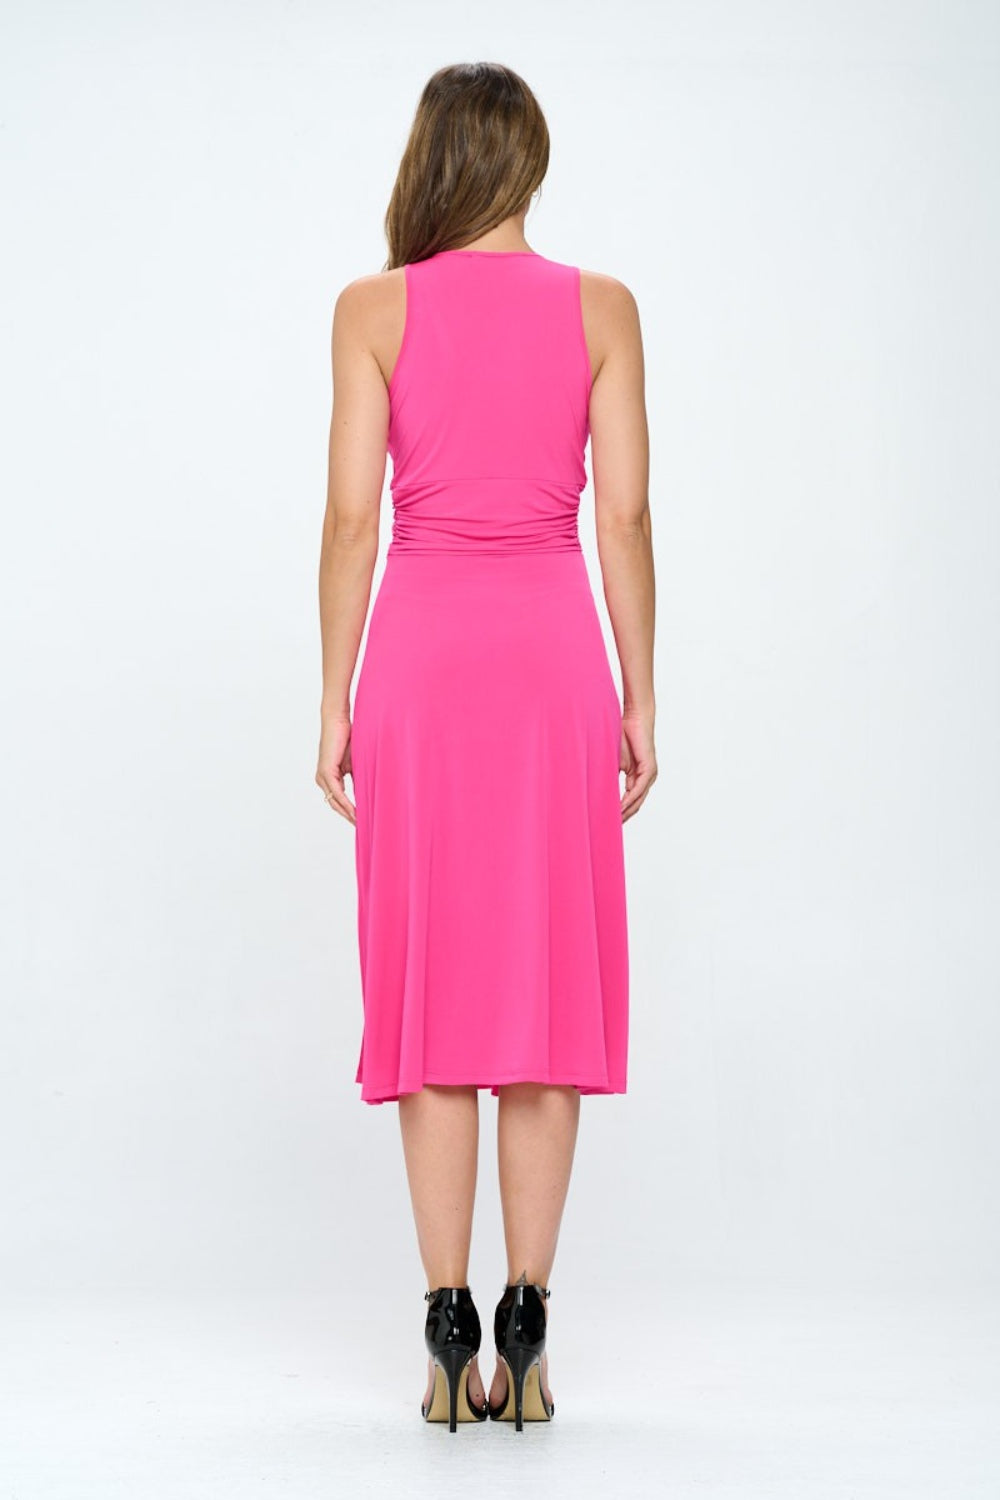 This ruched waist sleeveless slit dress is a stunning and versatile piece for any occasion. The ruched waist detailing creates a flattering silhouette by accentuating your curves. The sleeveless design is perfect for warmer weather, while the slit adds a touch of allure and movement. S  - L